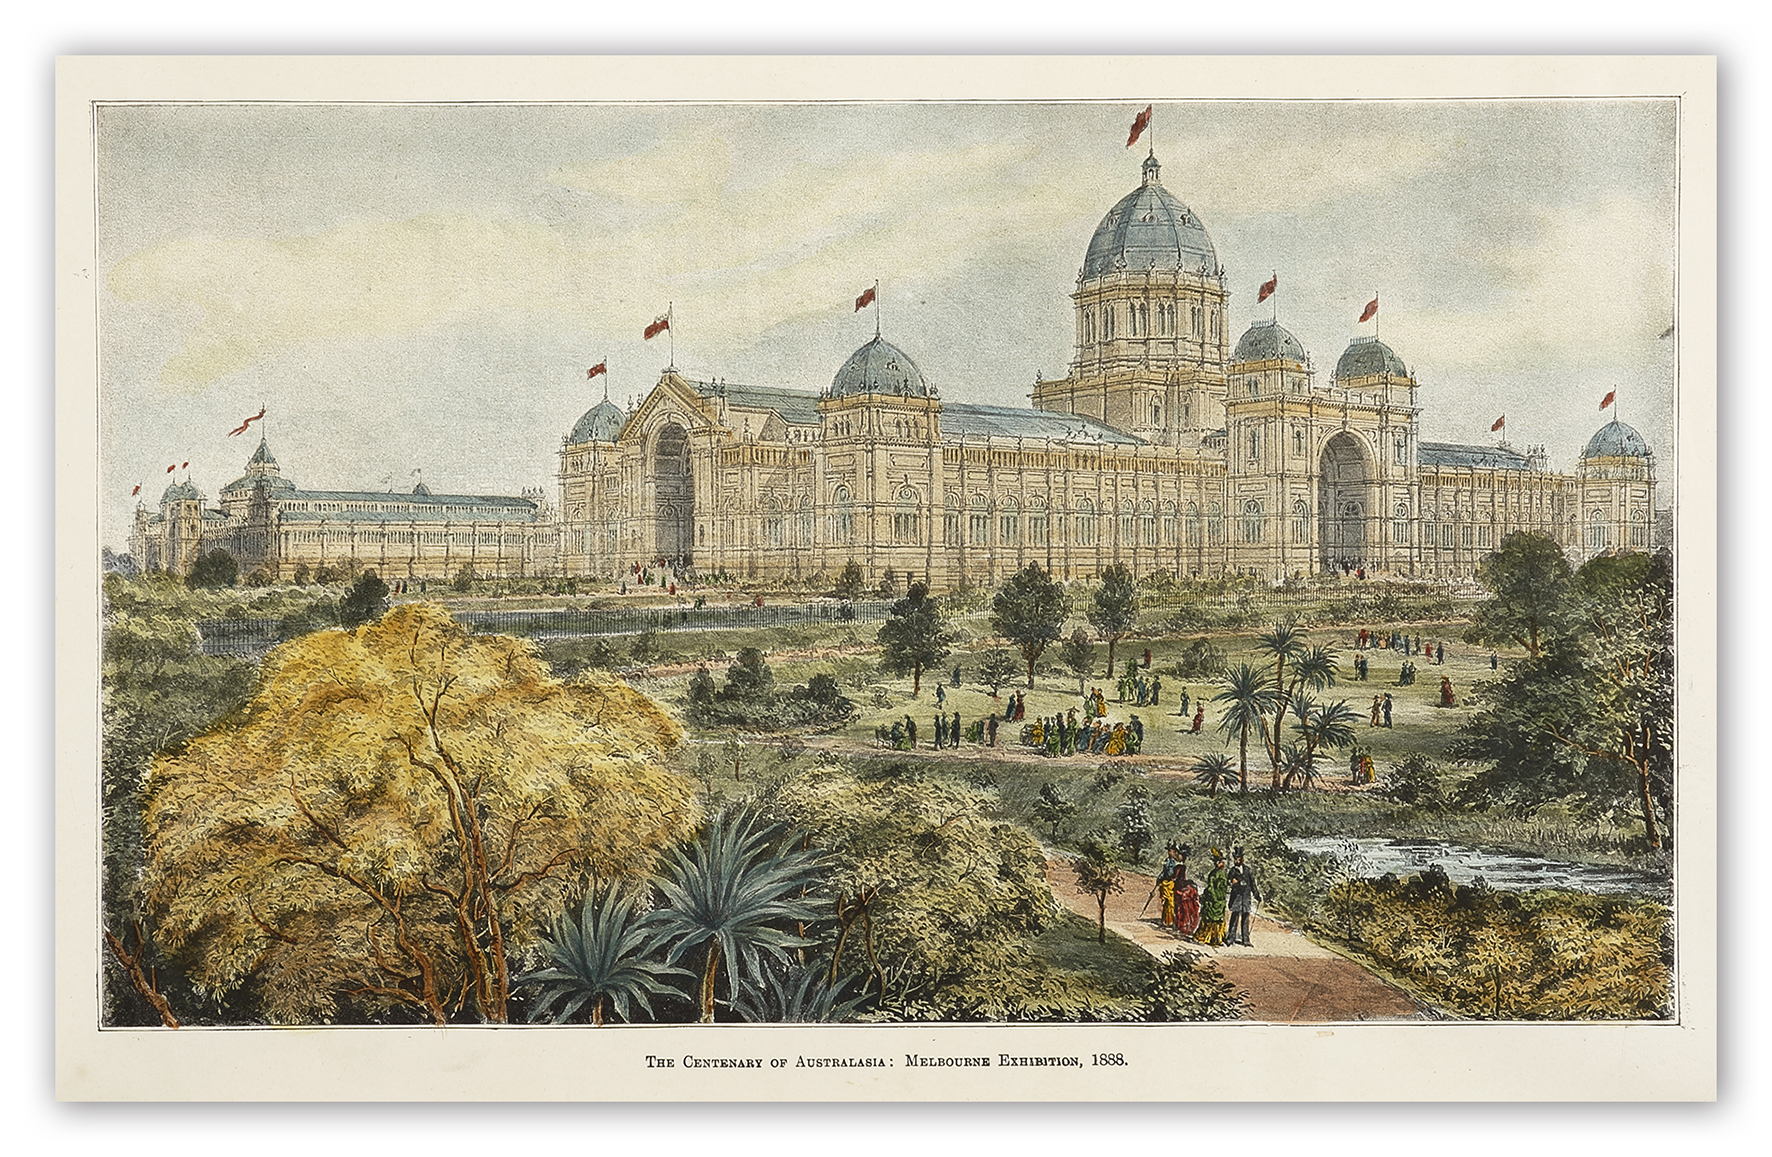 The Centenary of Australasia: Melbourne Exhibition, 1888. - Antique Print from 1889